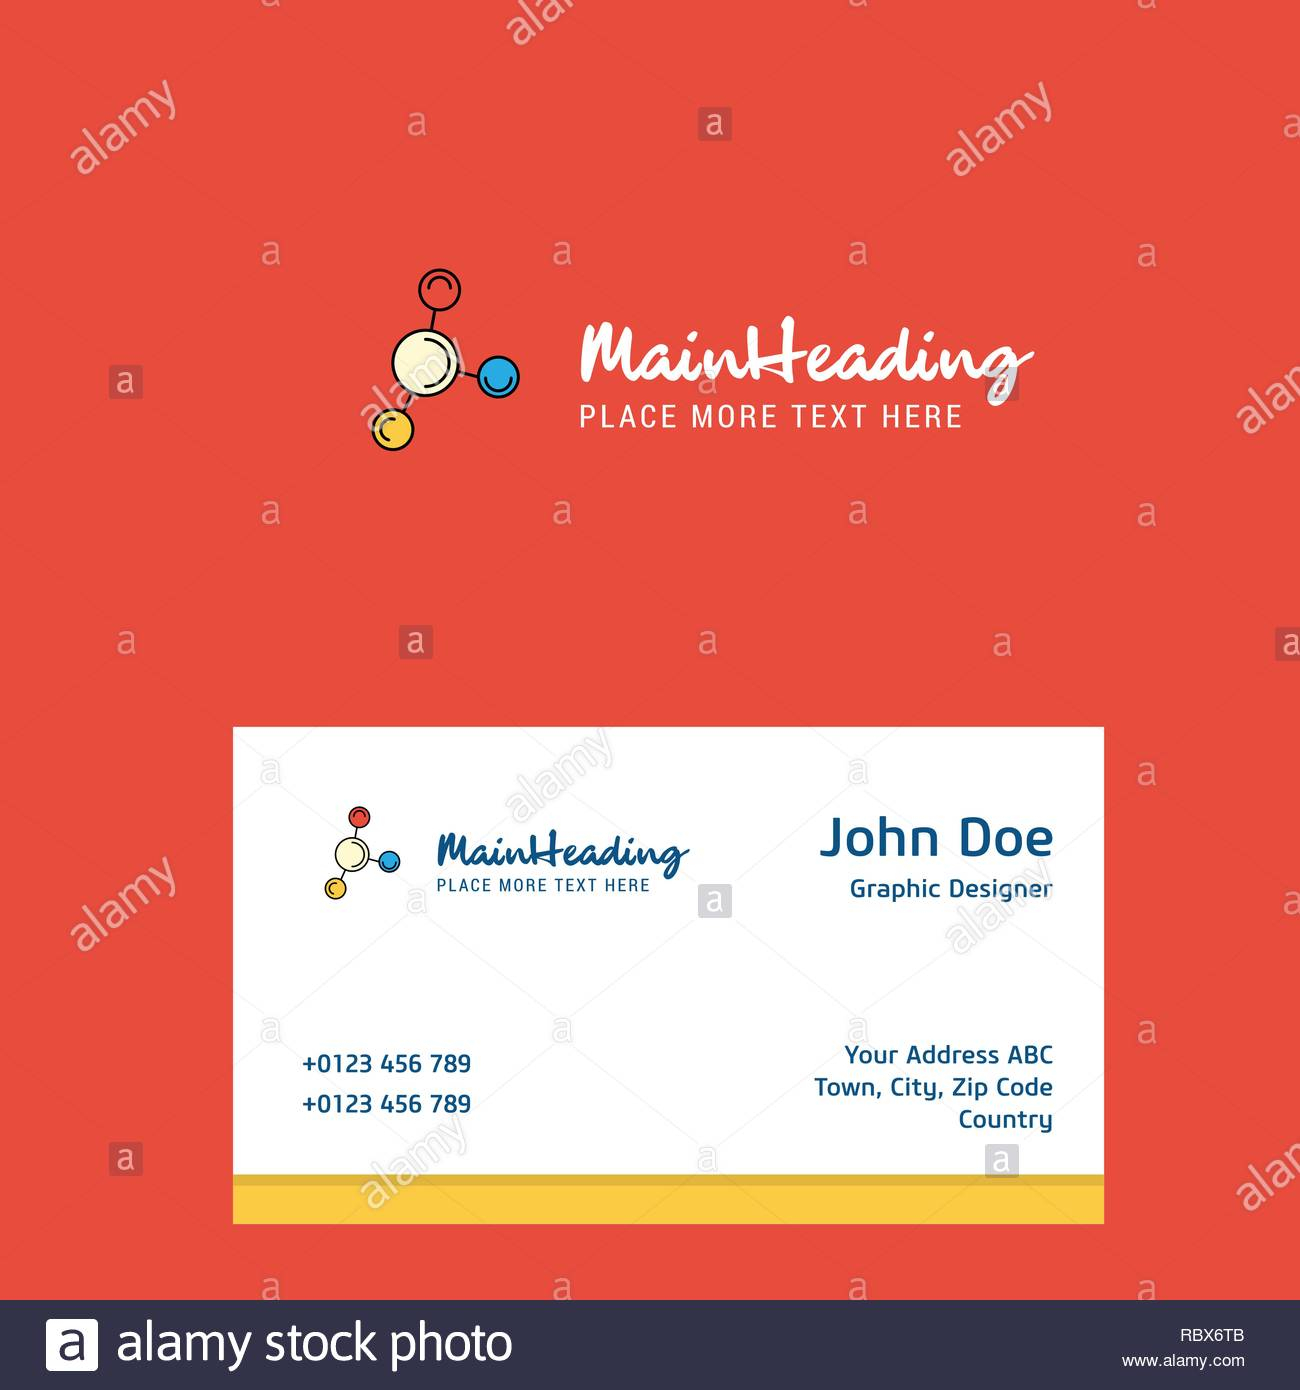 Networking Logo Design With Business Card Template. Elegant With Regard To Networking Card Template